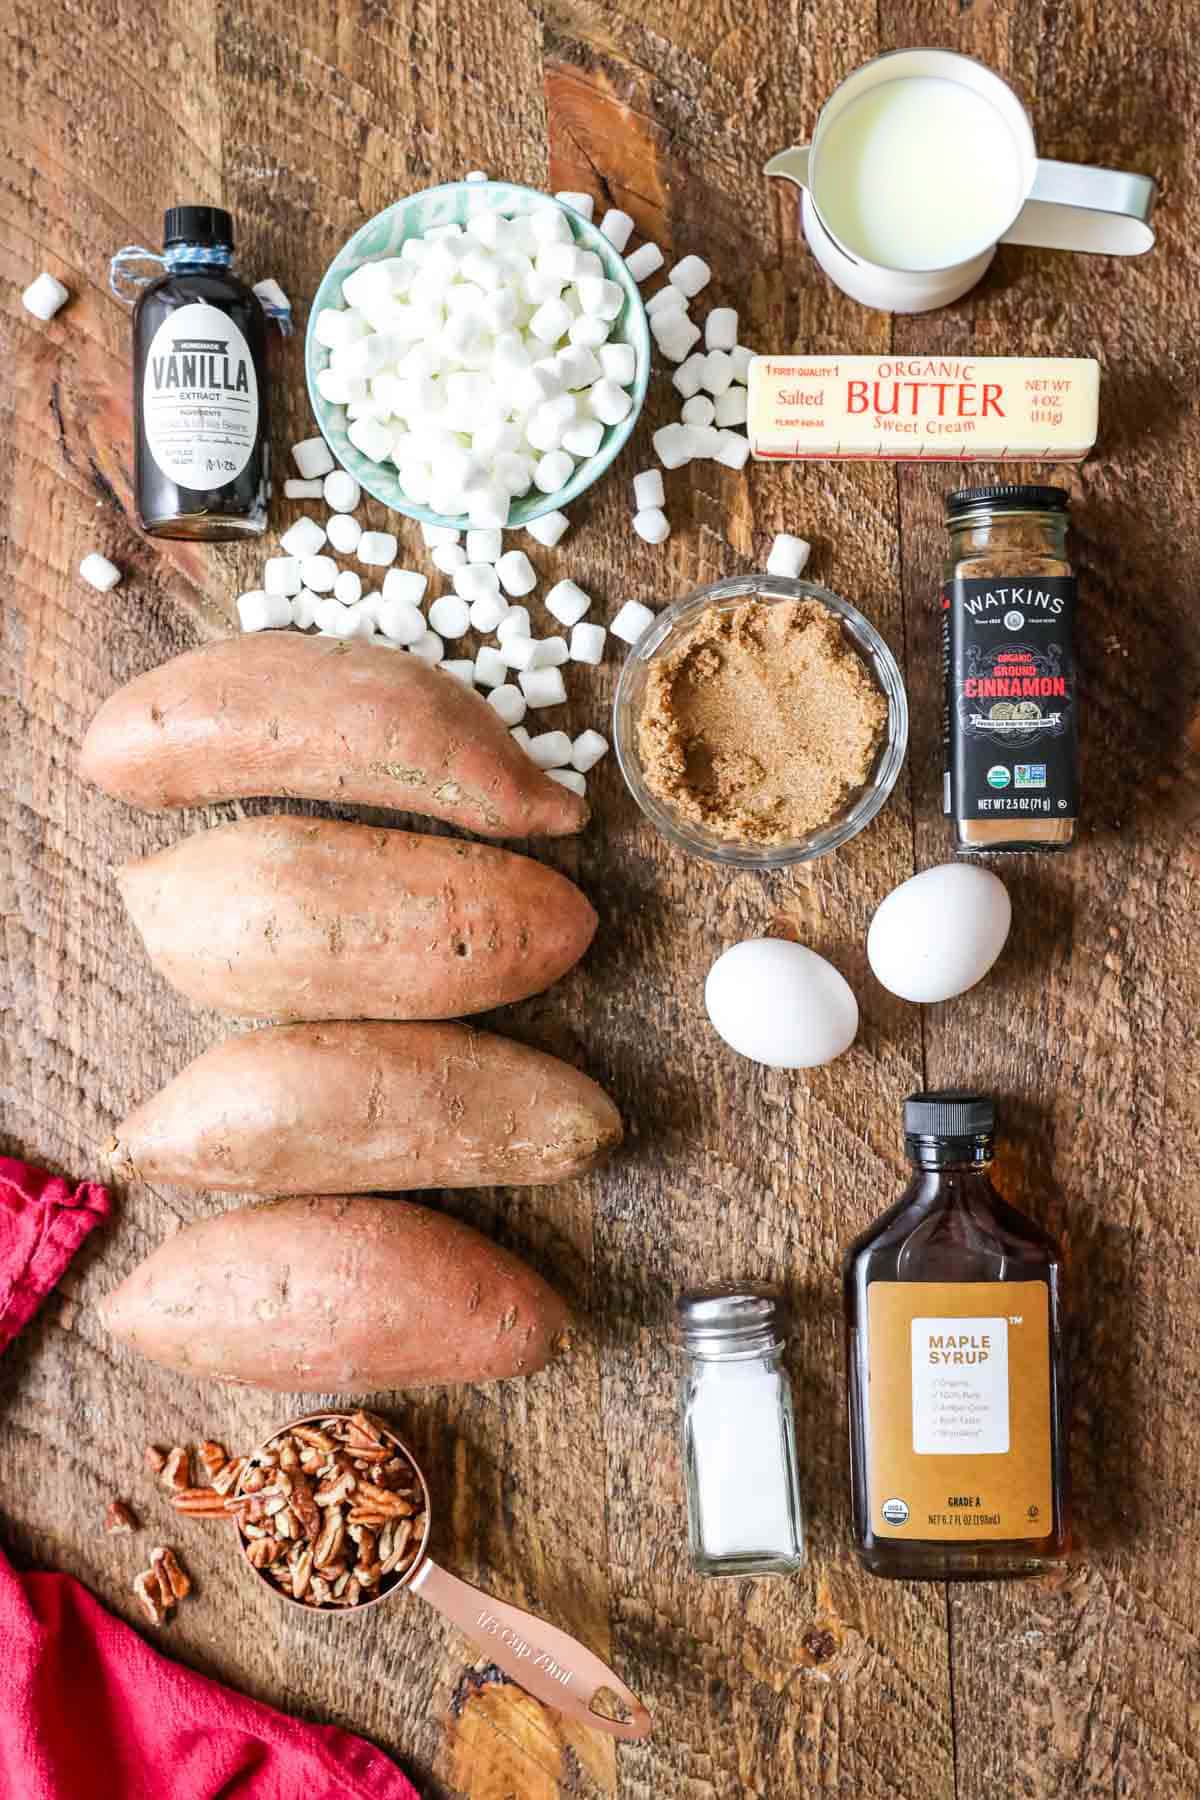 Overhead photo showing ingredients for sweet potato casserole